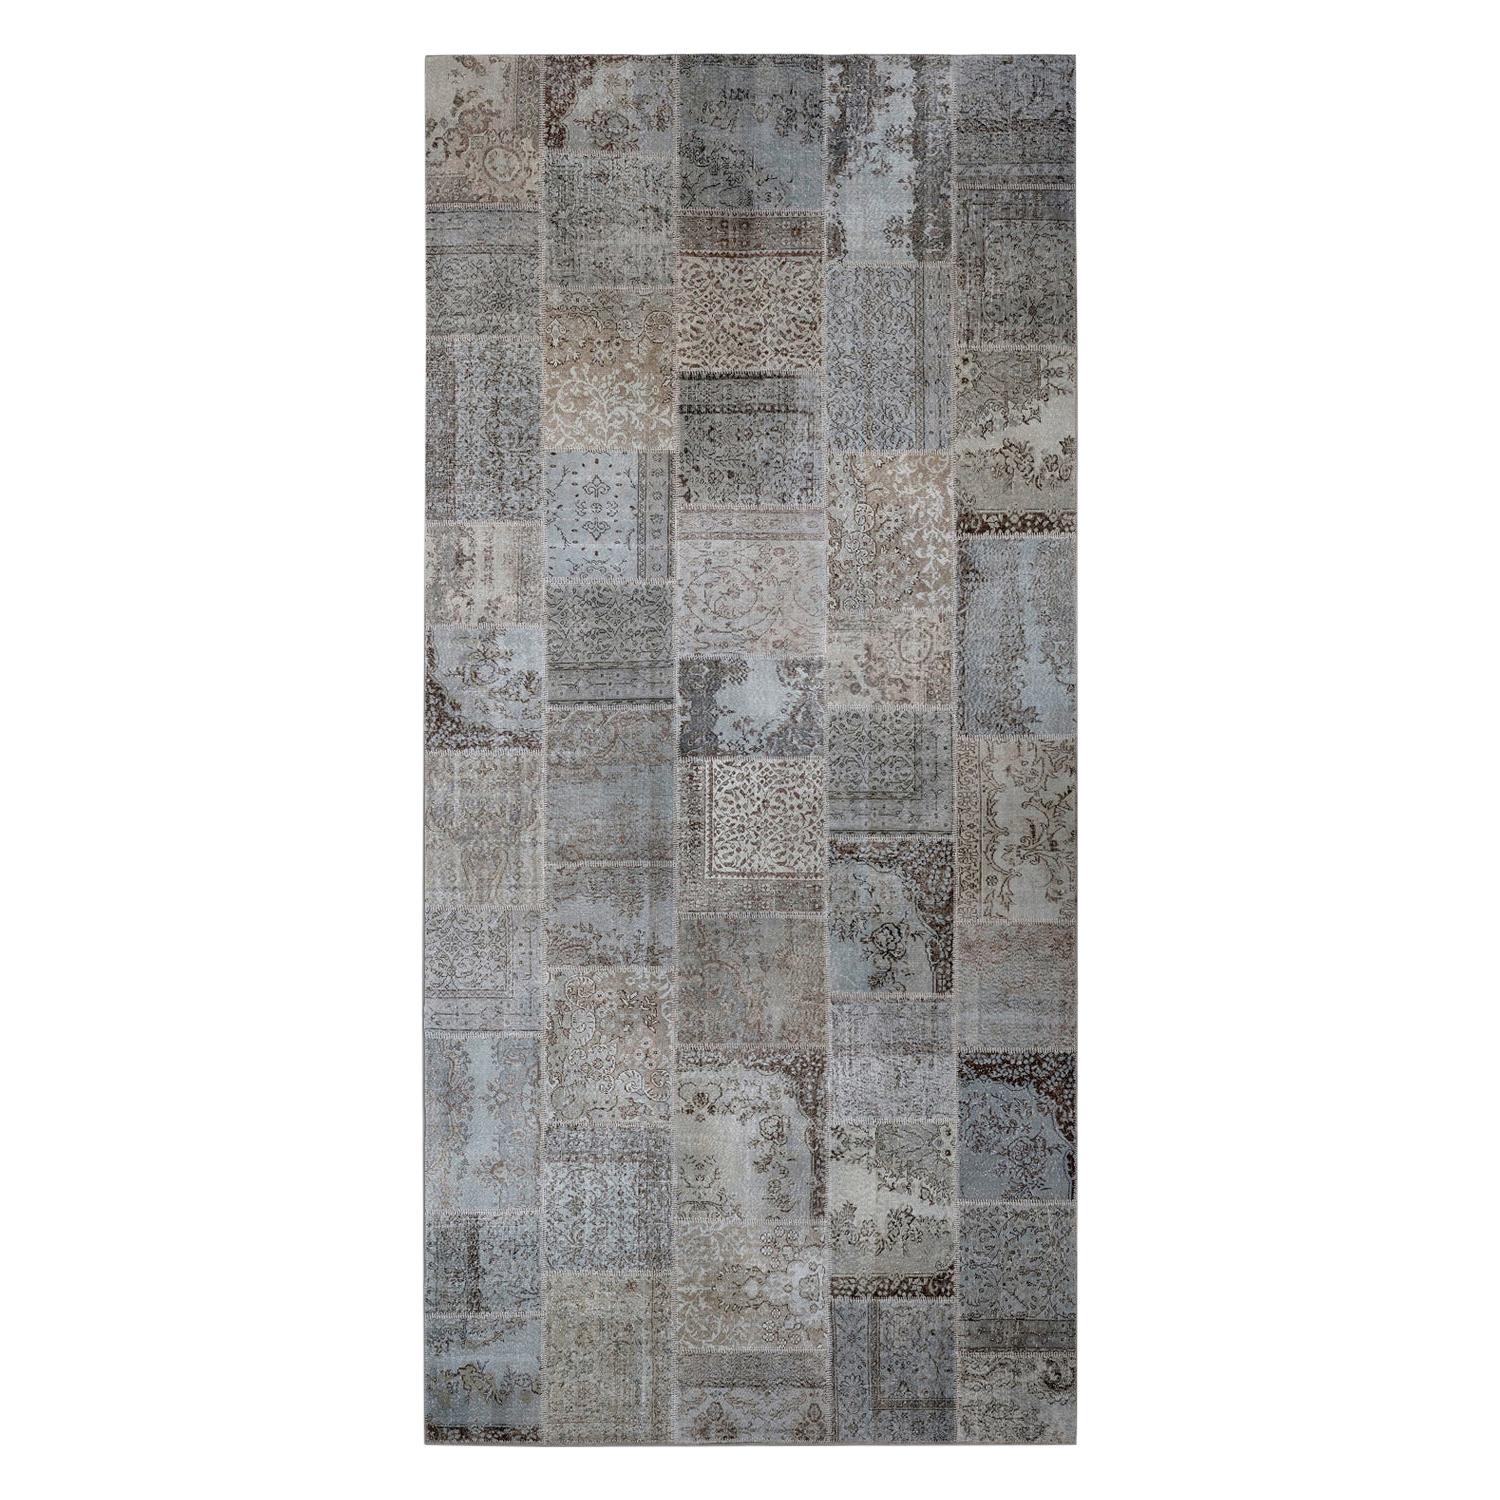 21st Century Vintage Wool Cotton Silvery Thin Rug by Deanna Comellini 300x400 cm